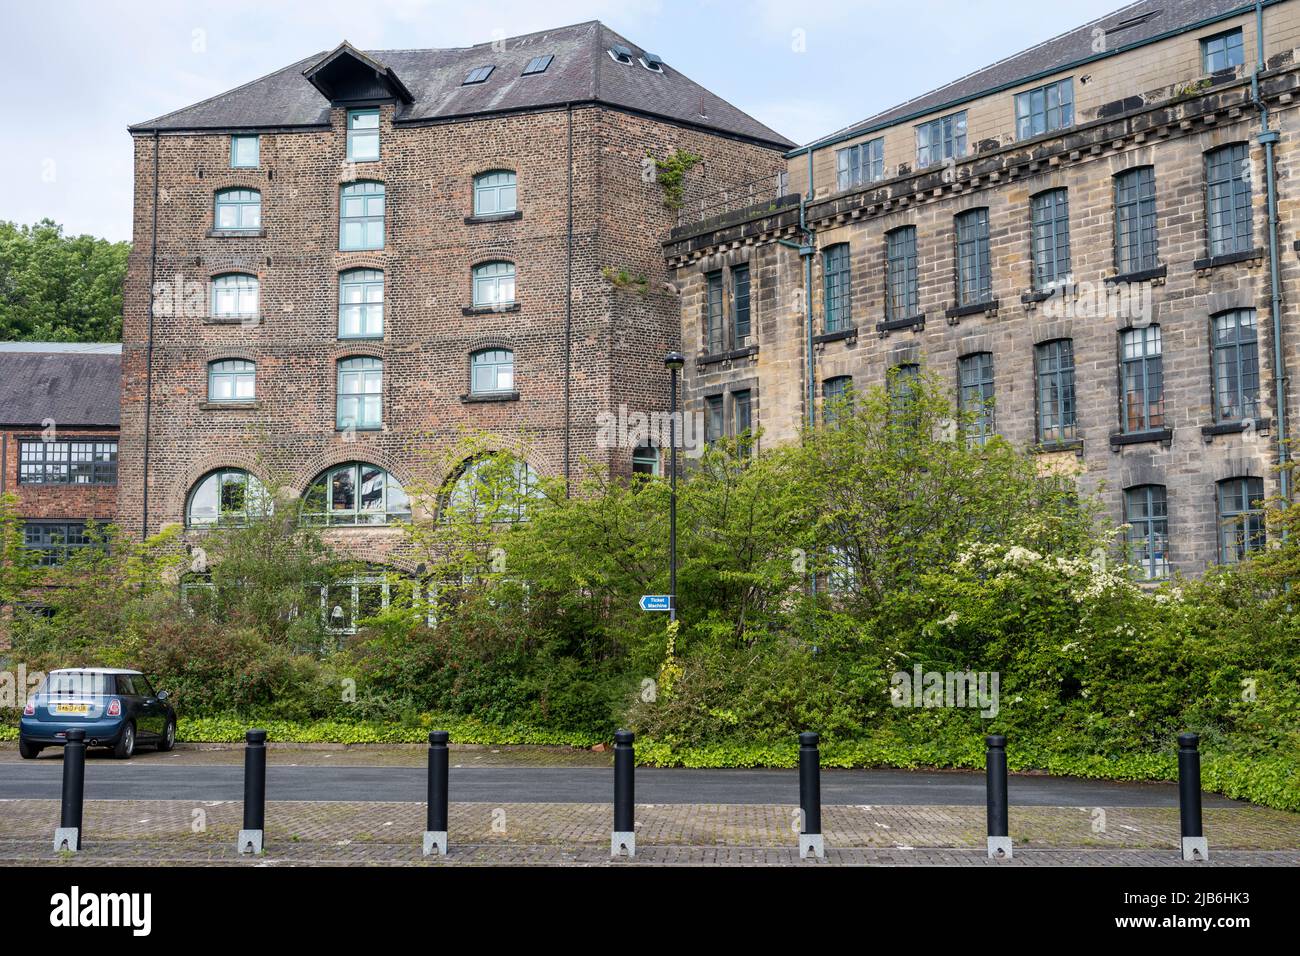 View of the former warehouse buildings of Seven Stories and 36 Lime Street in the Ouseburn cultural quarter, Newcastle upon Tyne, UK. Stock Photo